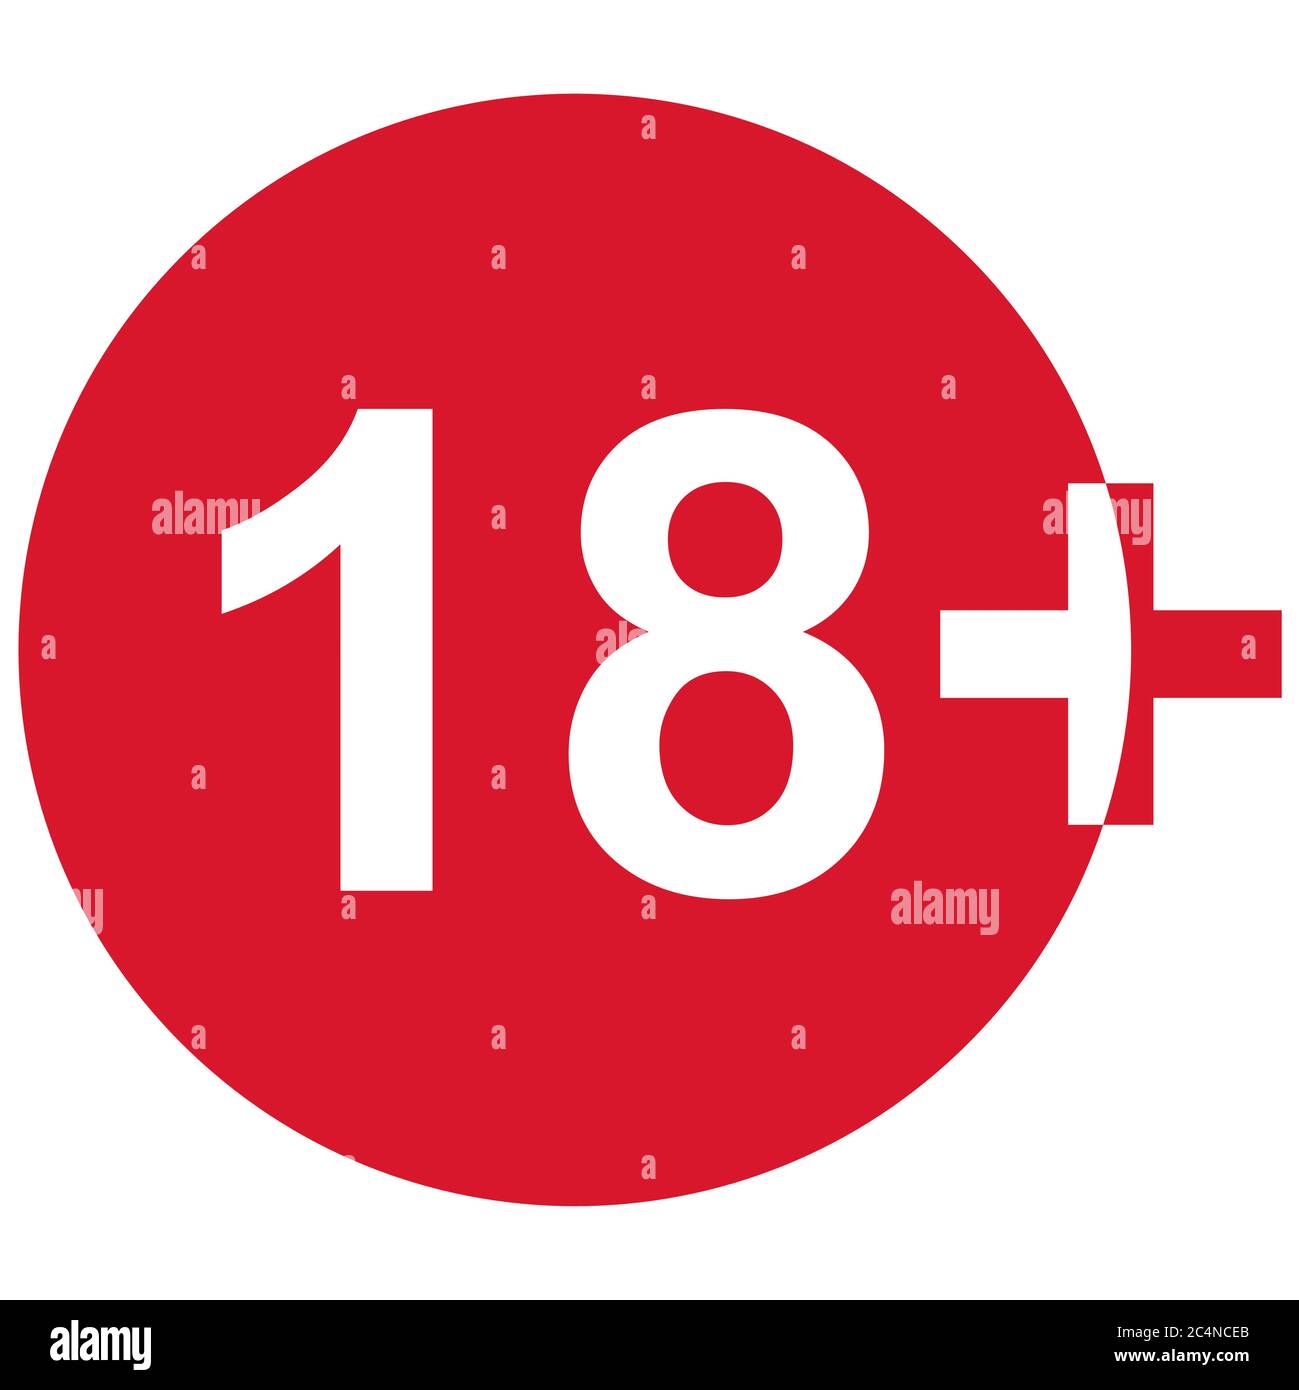 18+ restriction flat sign isolated in red circle. Age limit symbol. No under eighteen years warning illustration . Stock Vector